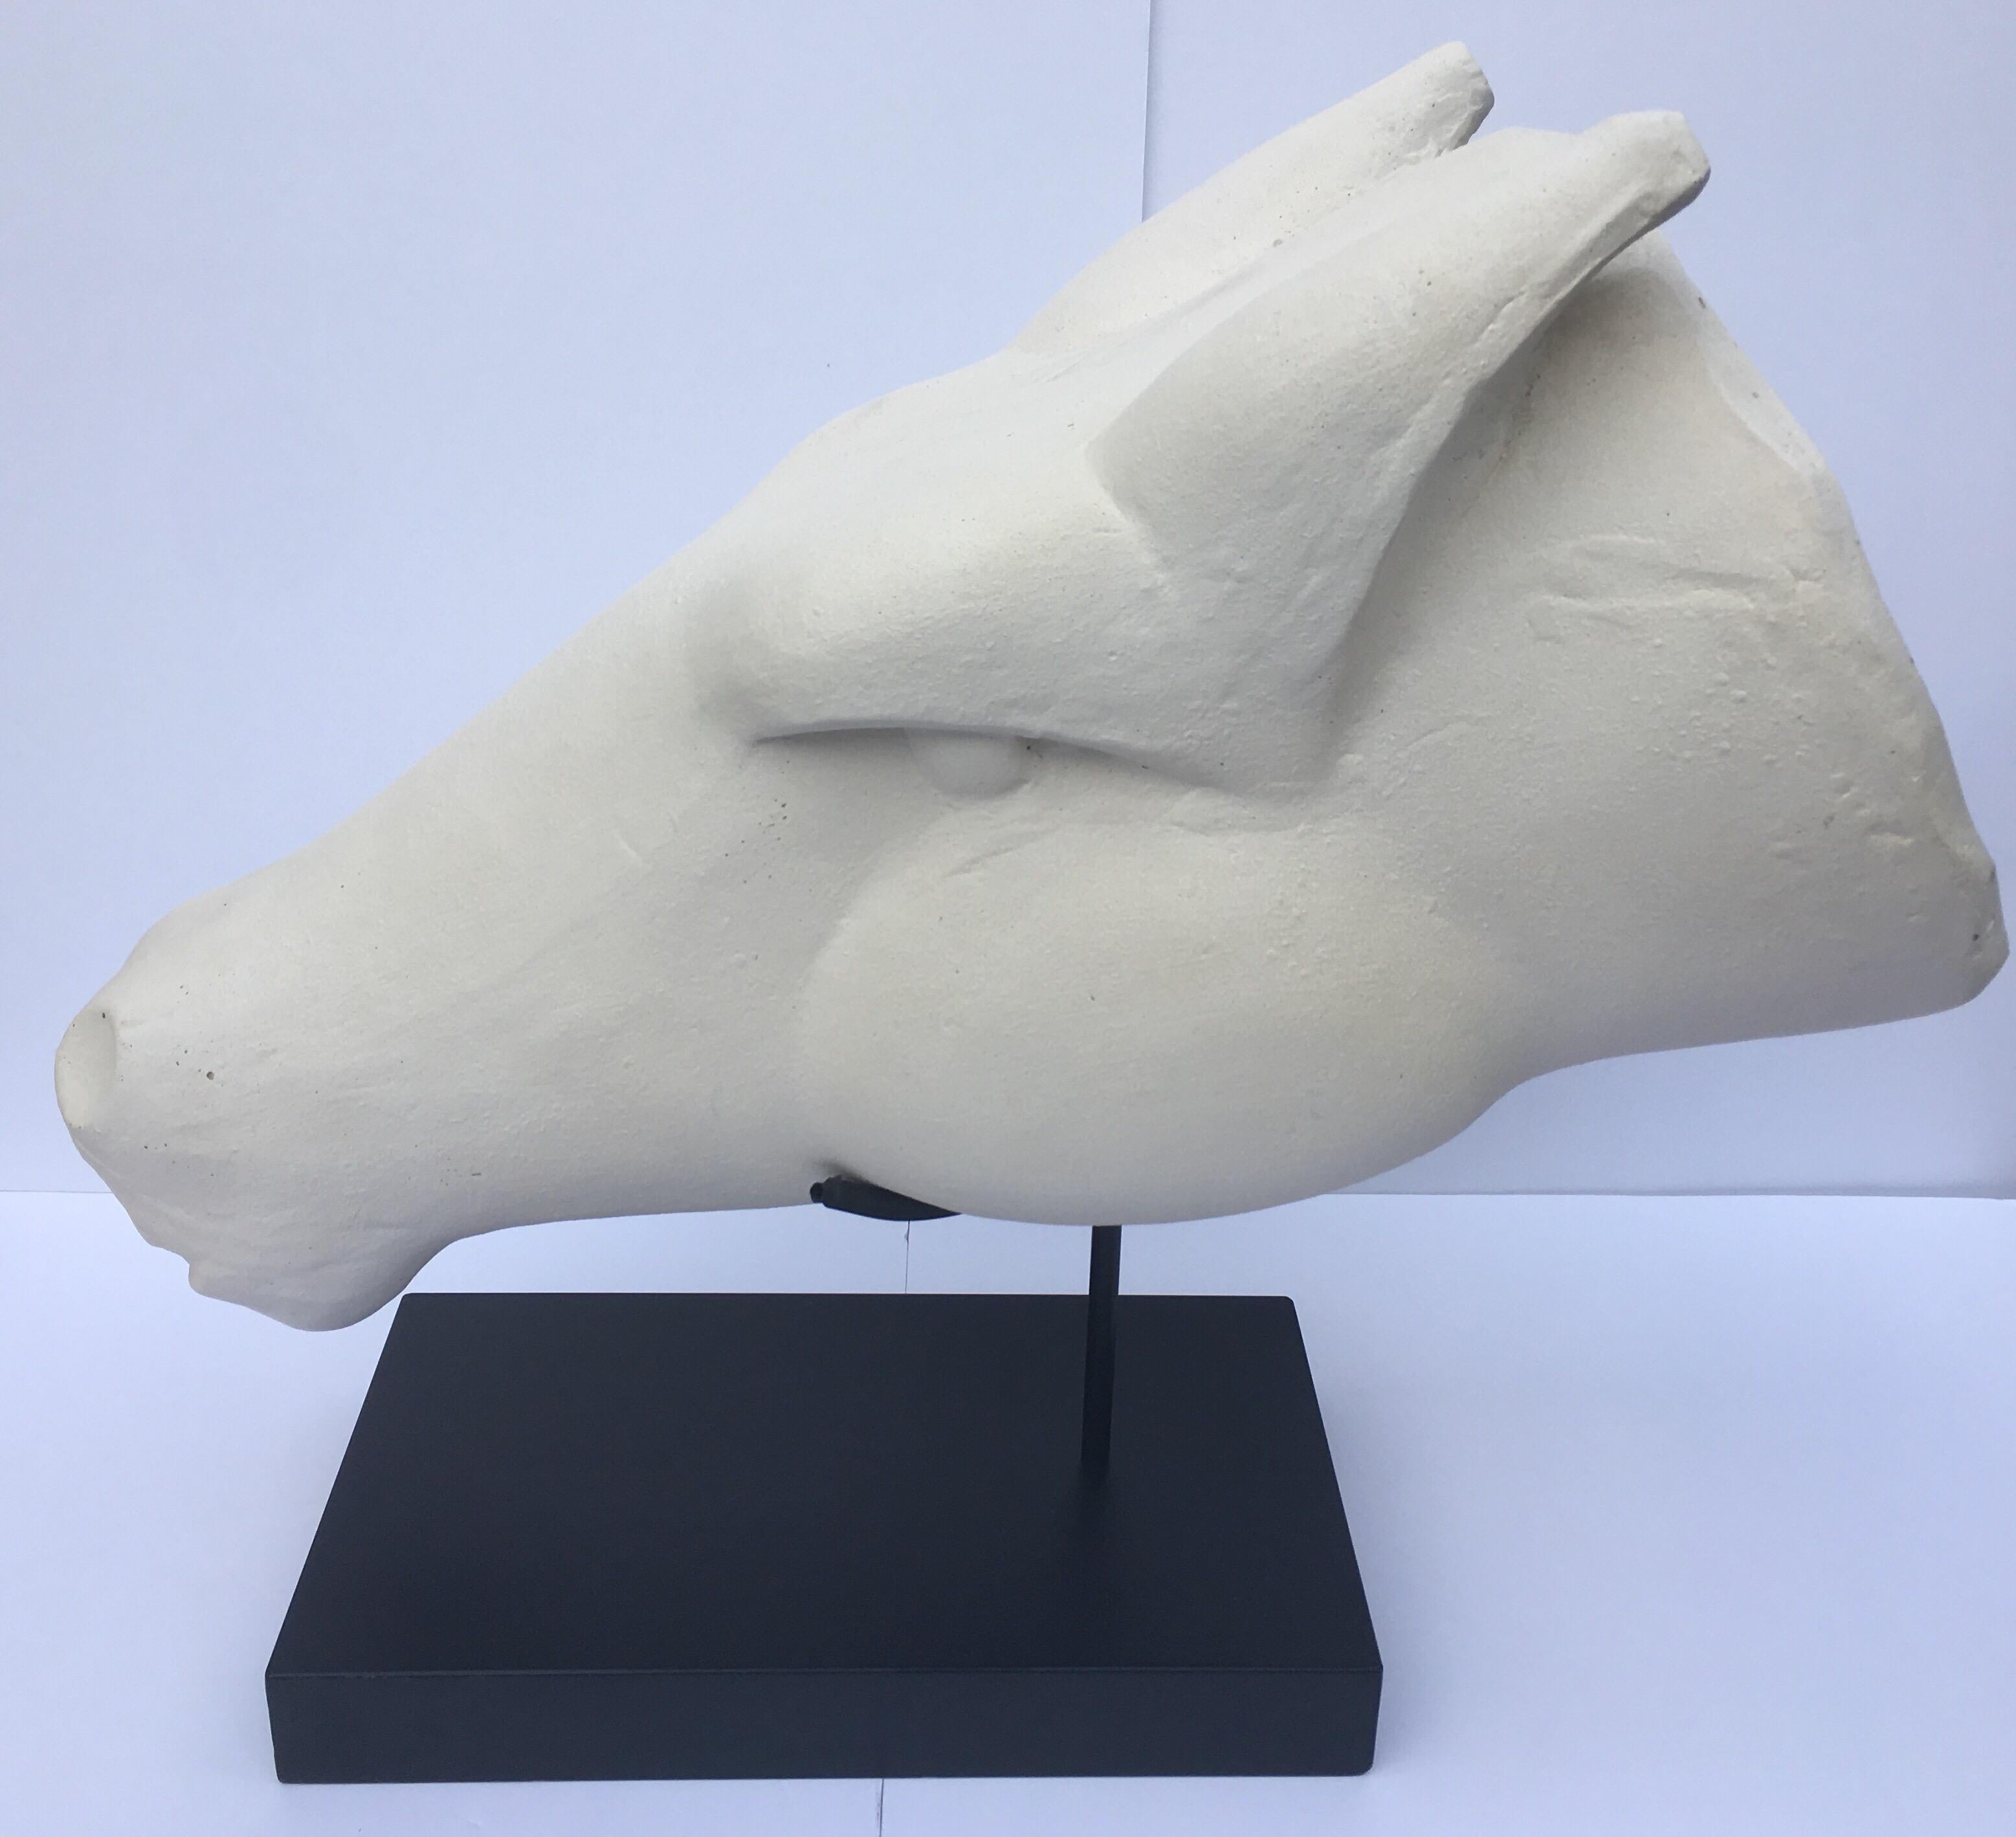 Large dramatic plaster horse head animal bust sculpture featuring a matte white/cream textured finish. This abstract tabletop equestrian art piece is constructed of a heavy weight plaster composition and is displayed on a black metal Stand.